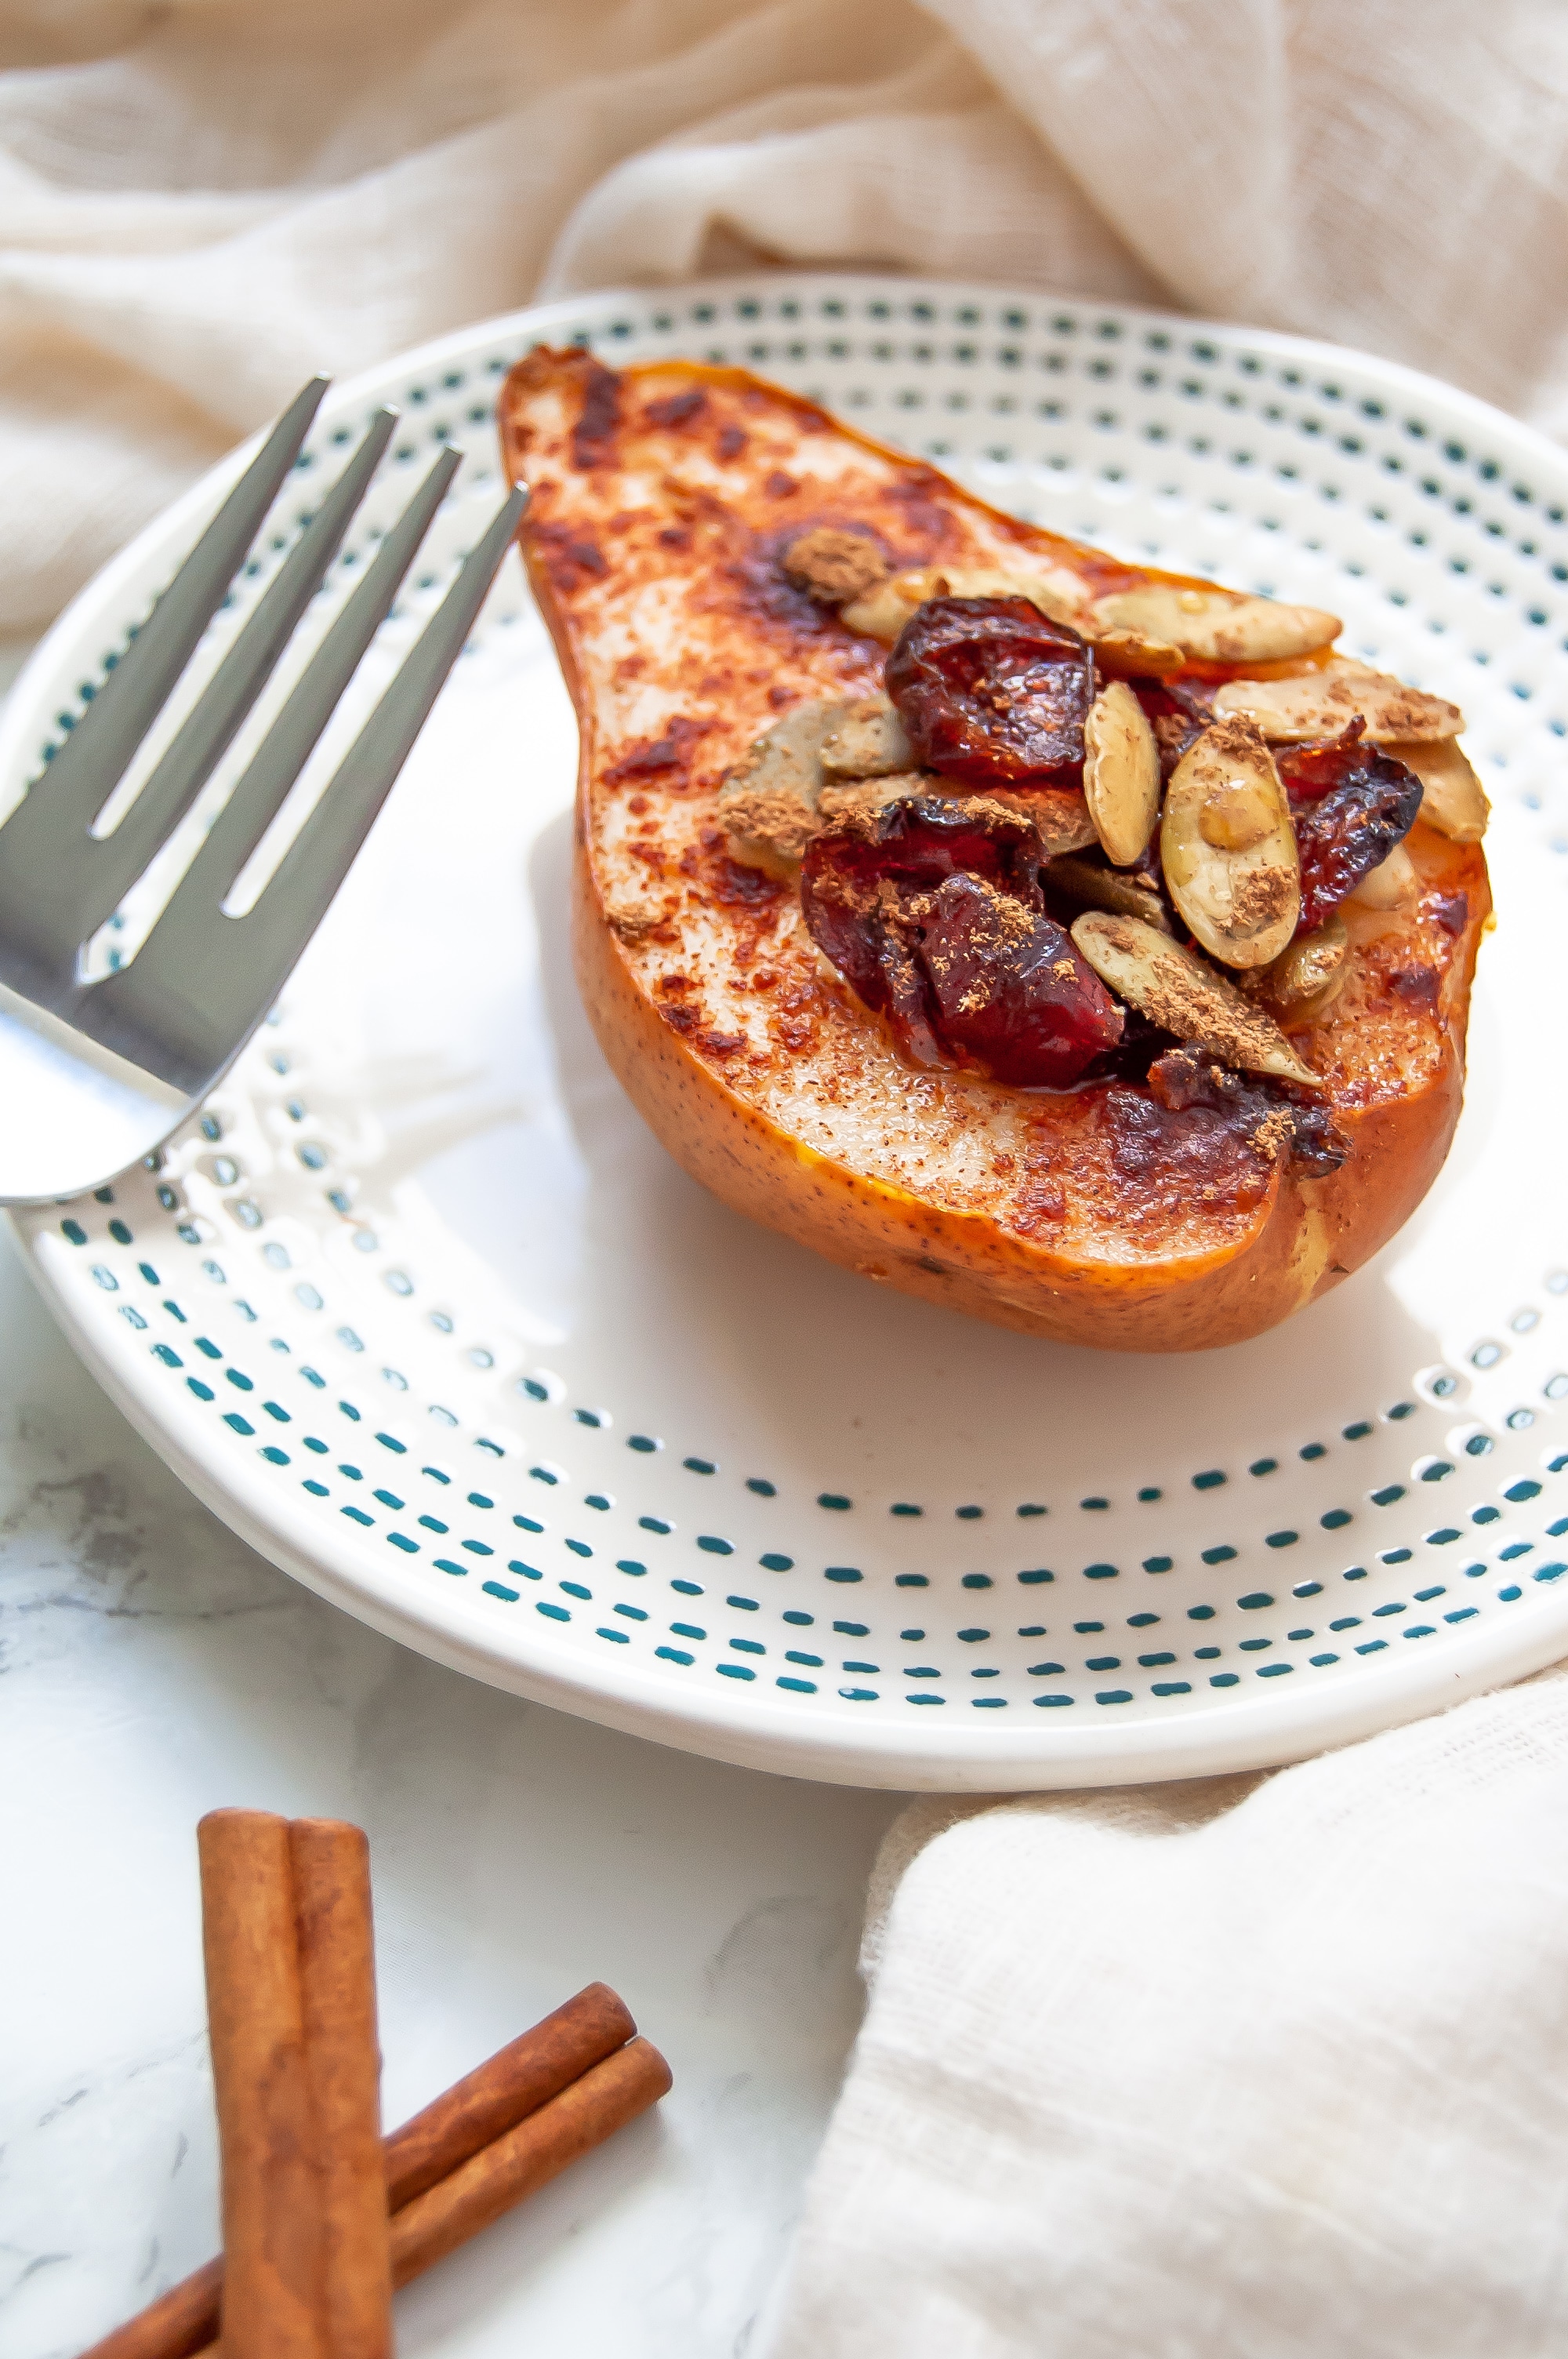 This healthy baked pears recipe is sweet, simple, and delicious. Healthy baked pears make a great holiday brunch recipe or simple Thanksgiving dessert!